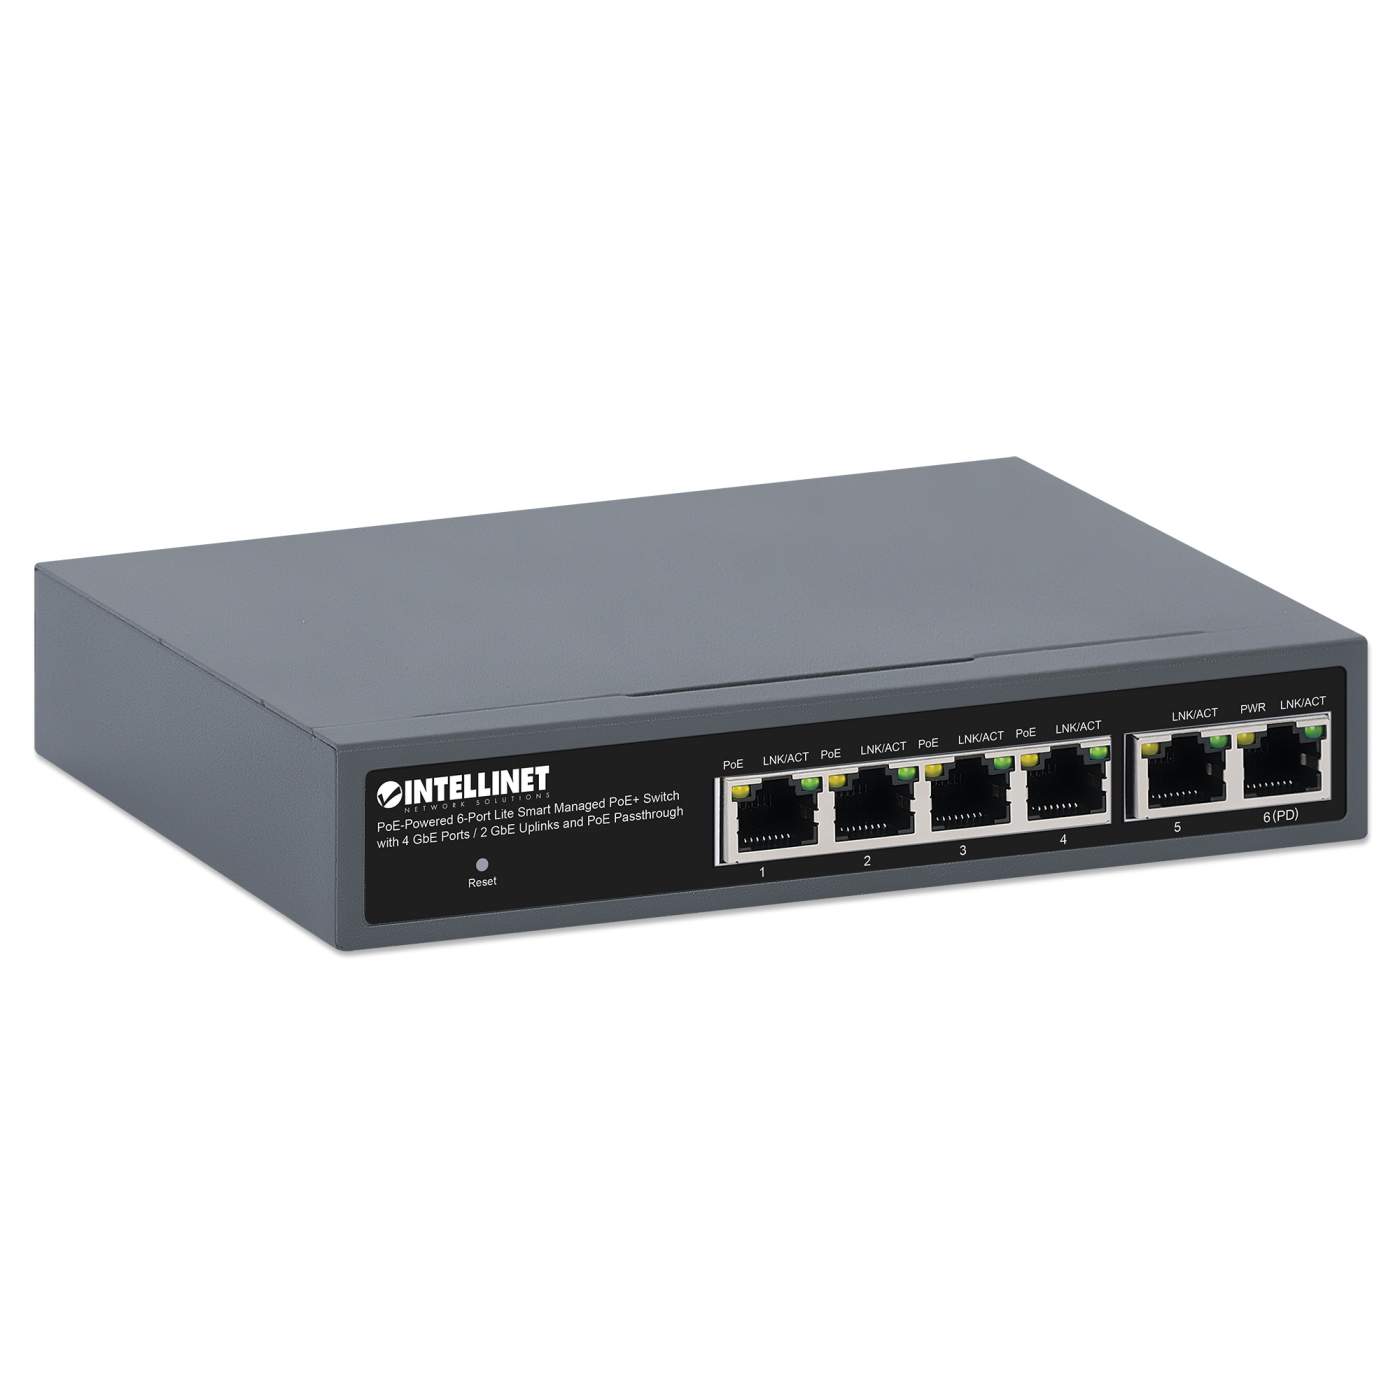 PoE-Powered 6-Port Lite Smart Managed PoE+ Switch with 4 GbE Ports / 2 GbE Uplinks and PoE Passthrough Image 2